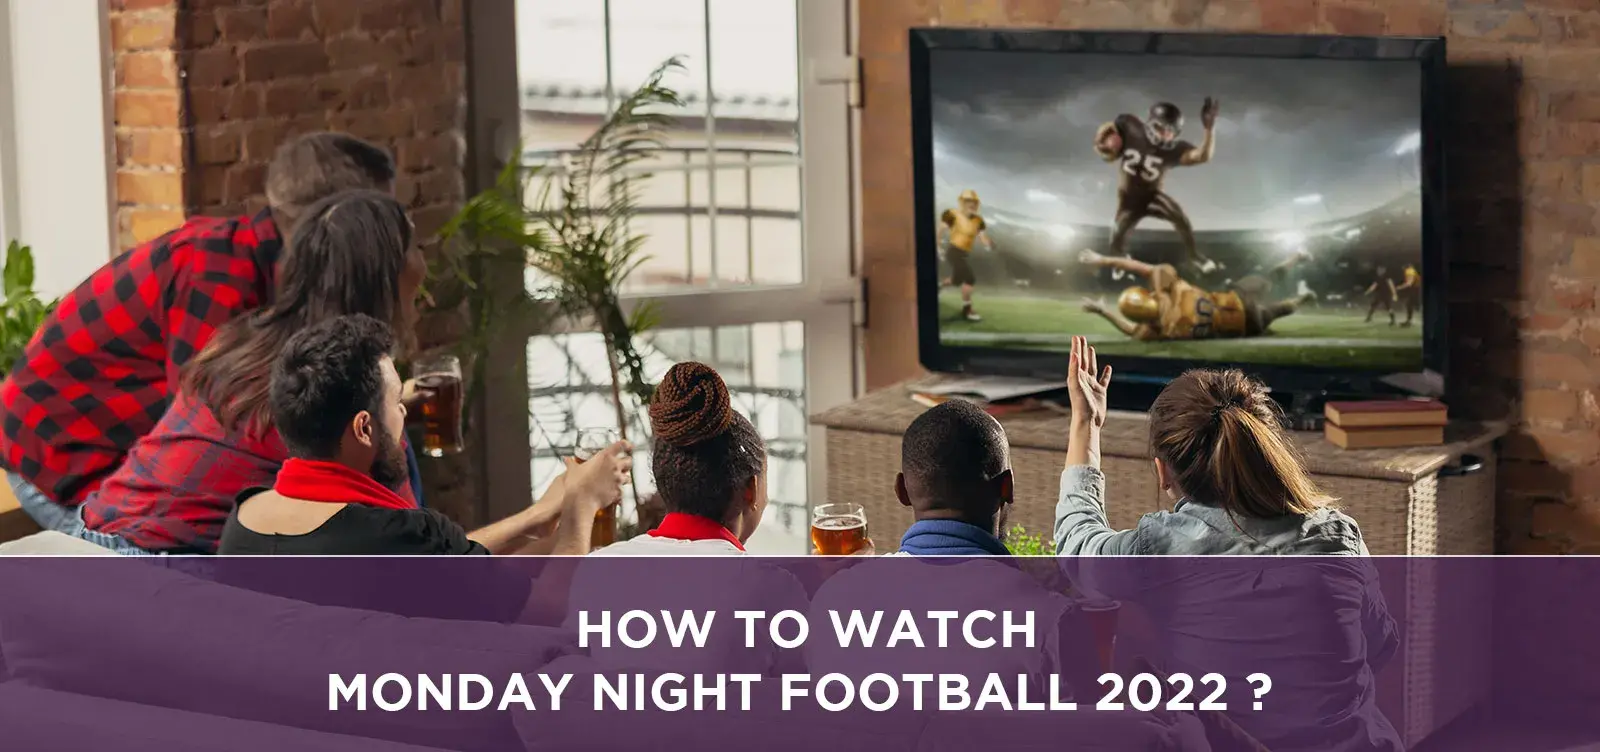 How to watch Monday night football 2022?